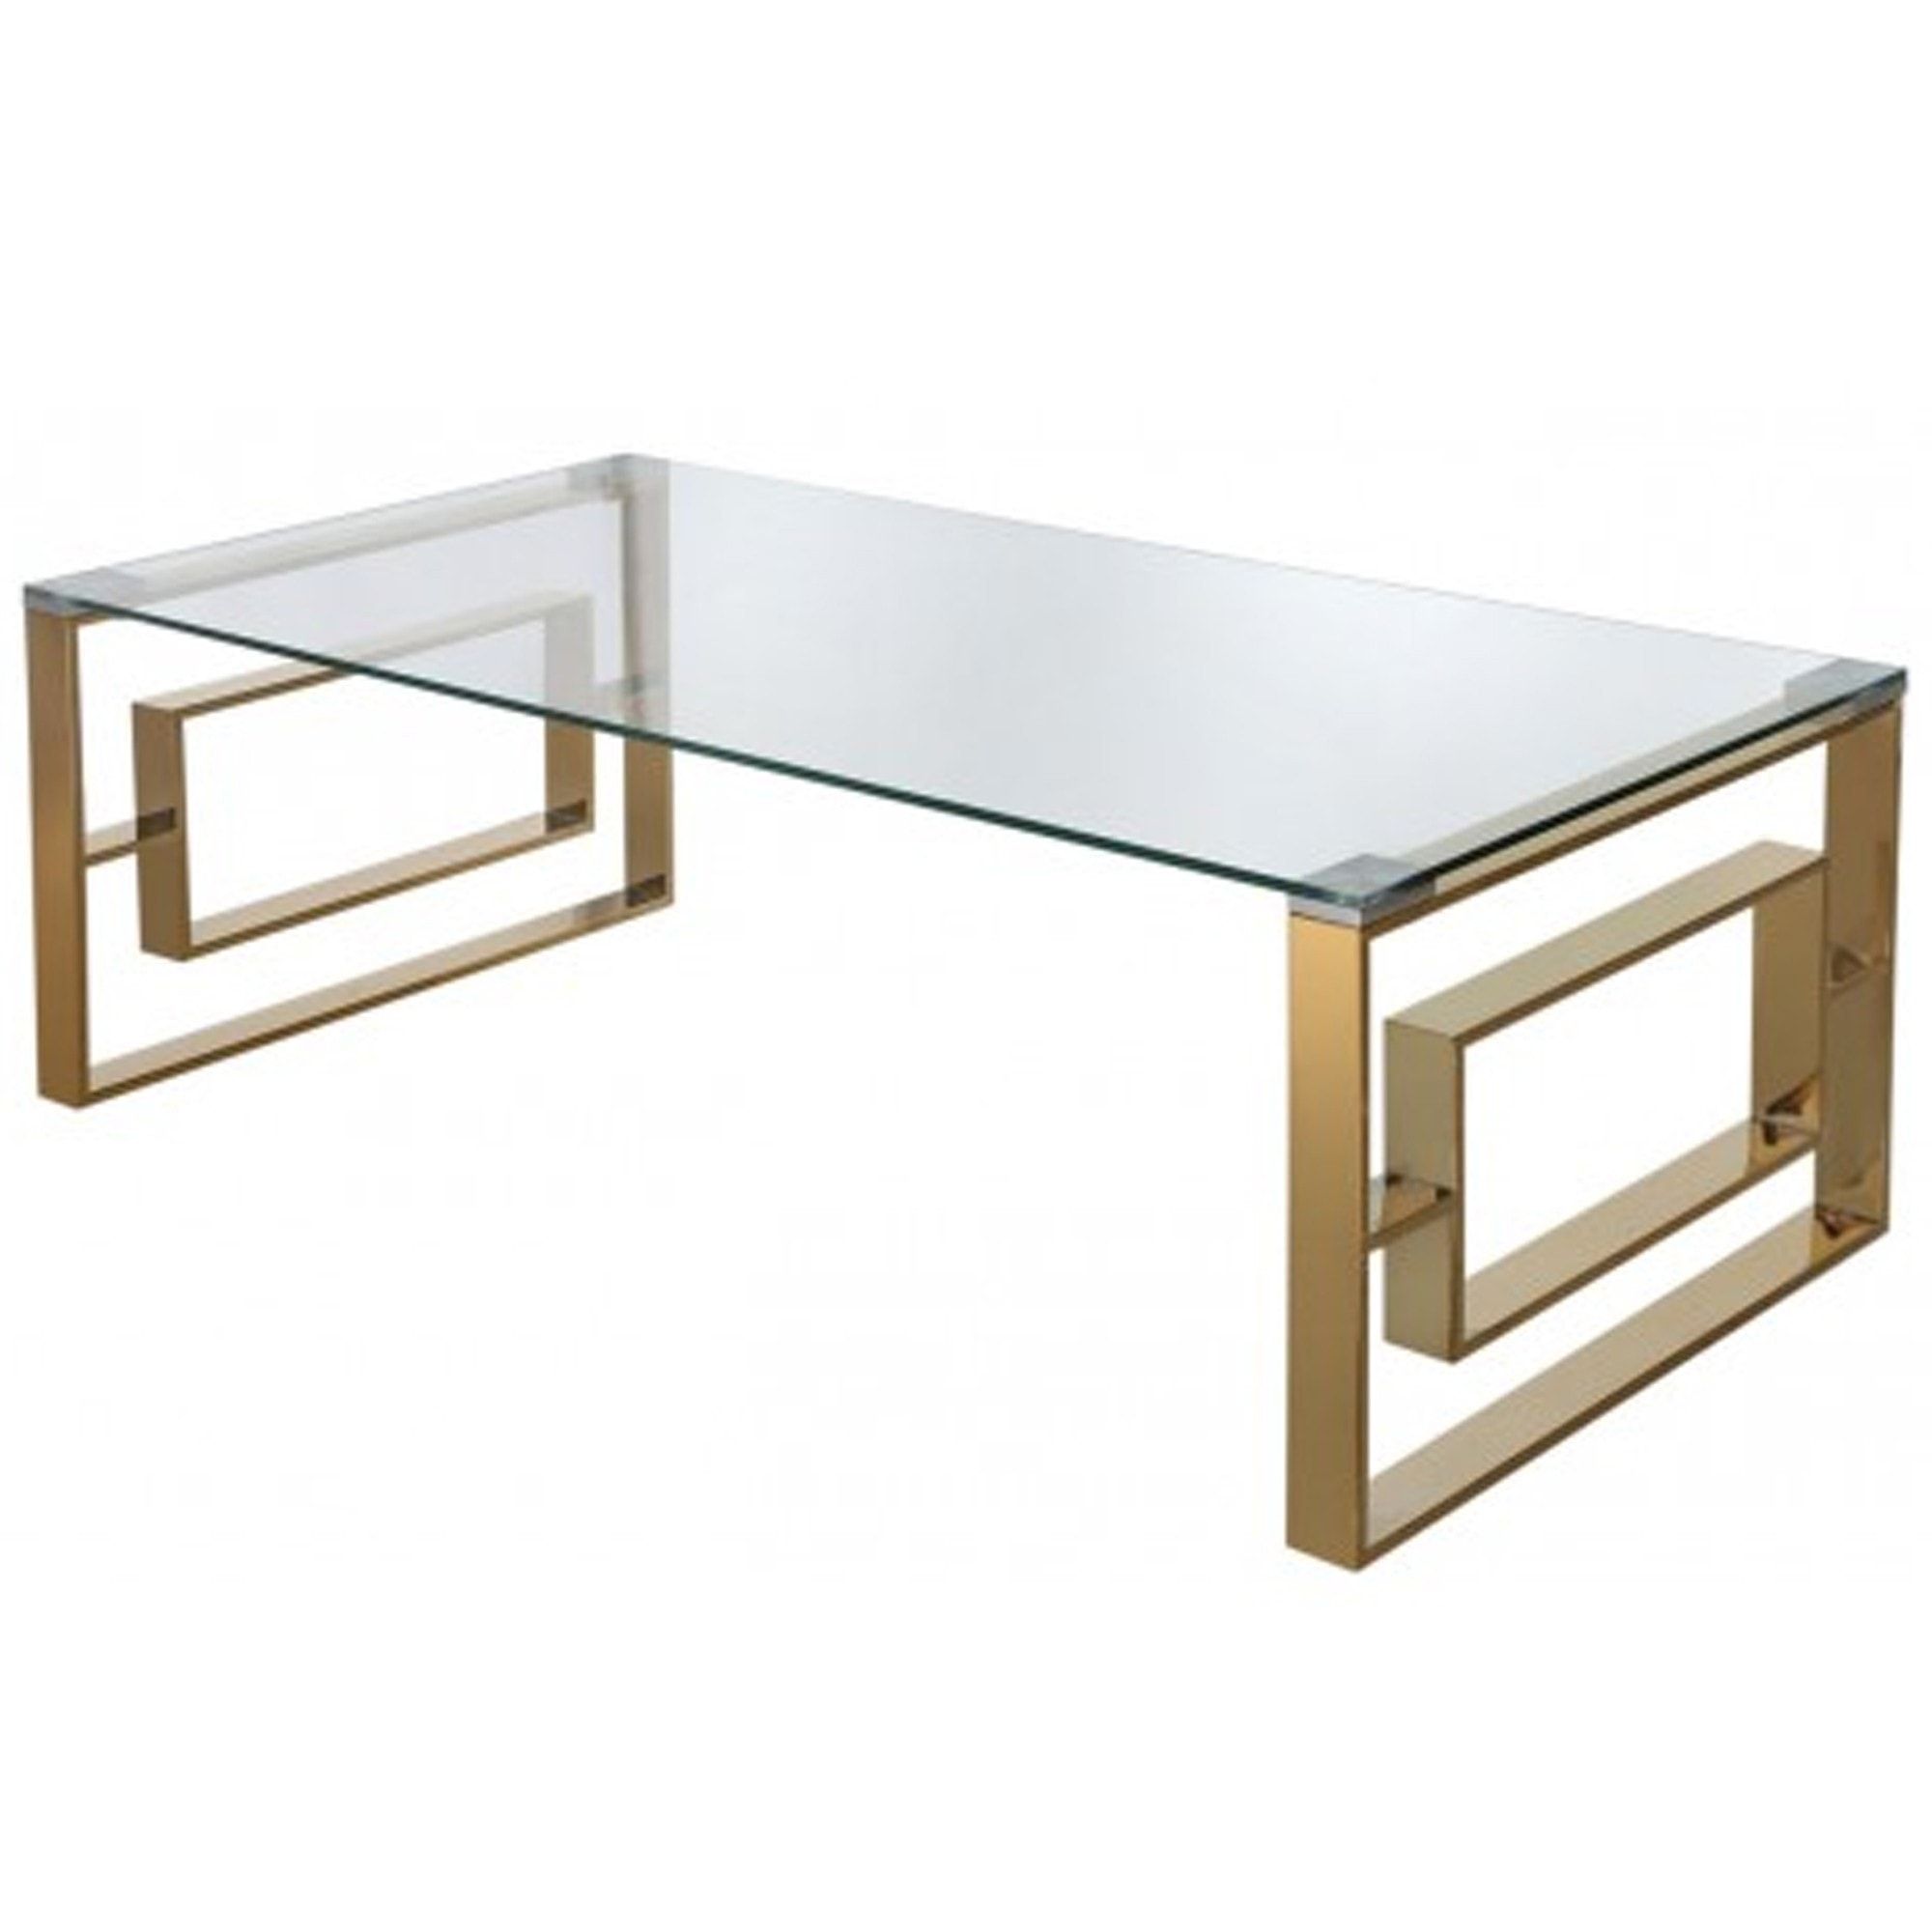 Apex Gold Metal Coffee Table | Gold Metal | Metal Coffee Table Pertaining To Glossy Finished Metal Coffee Tables (Gallery 6 of 20)